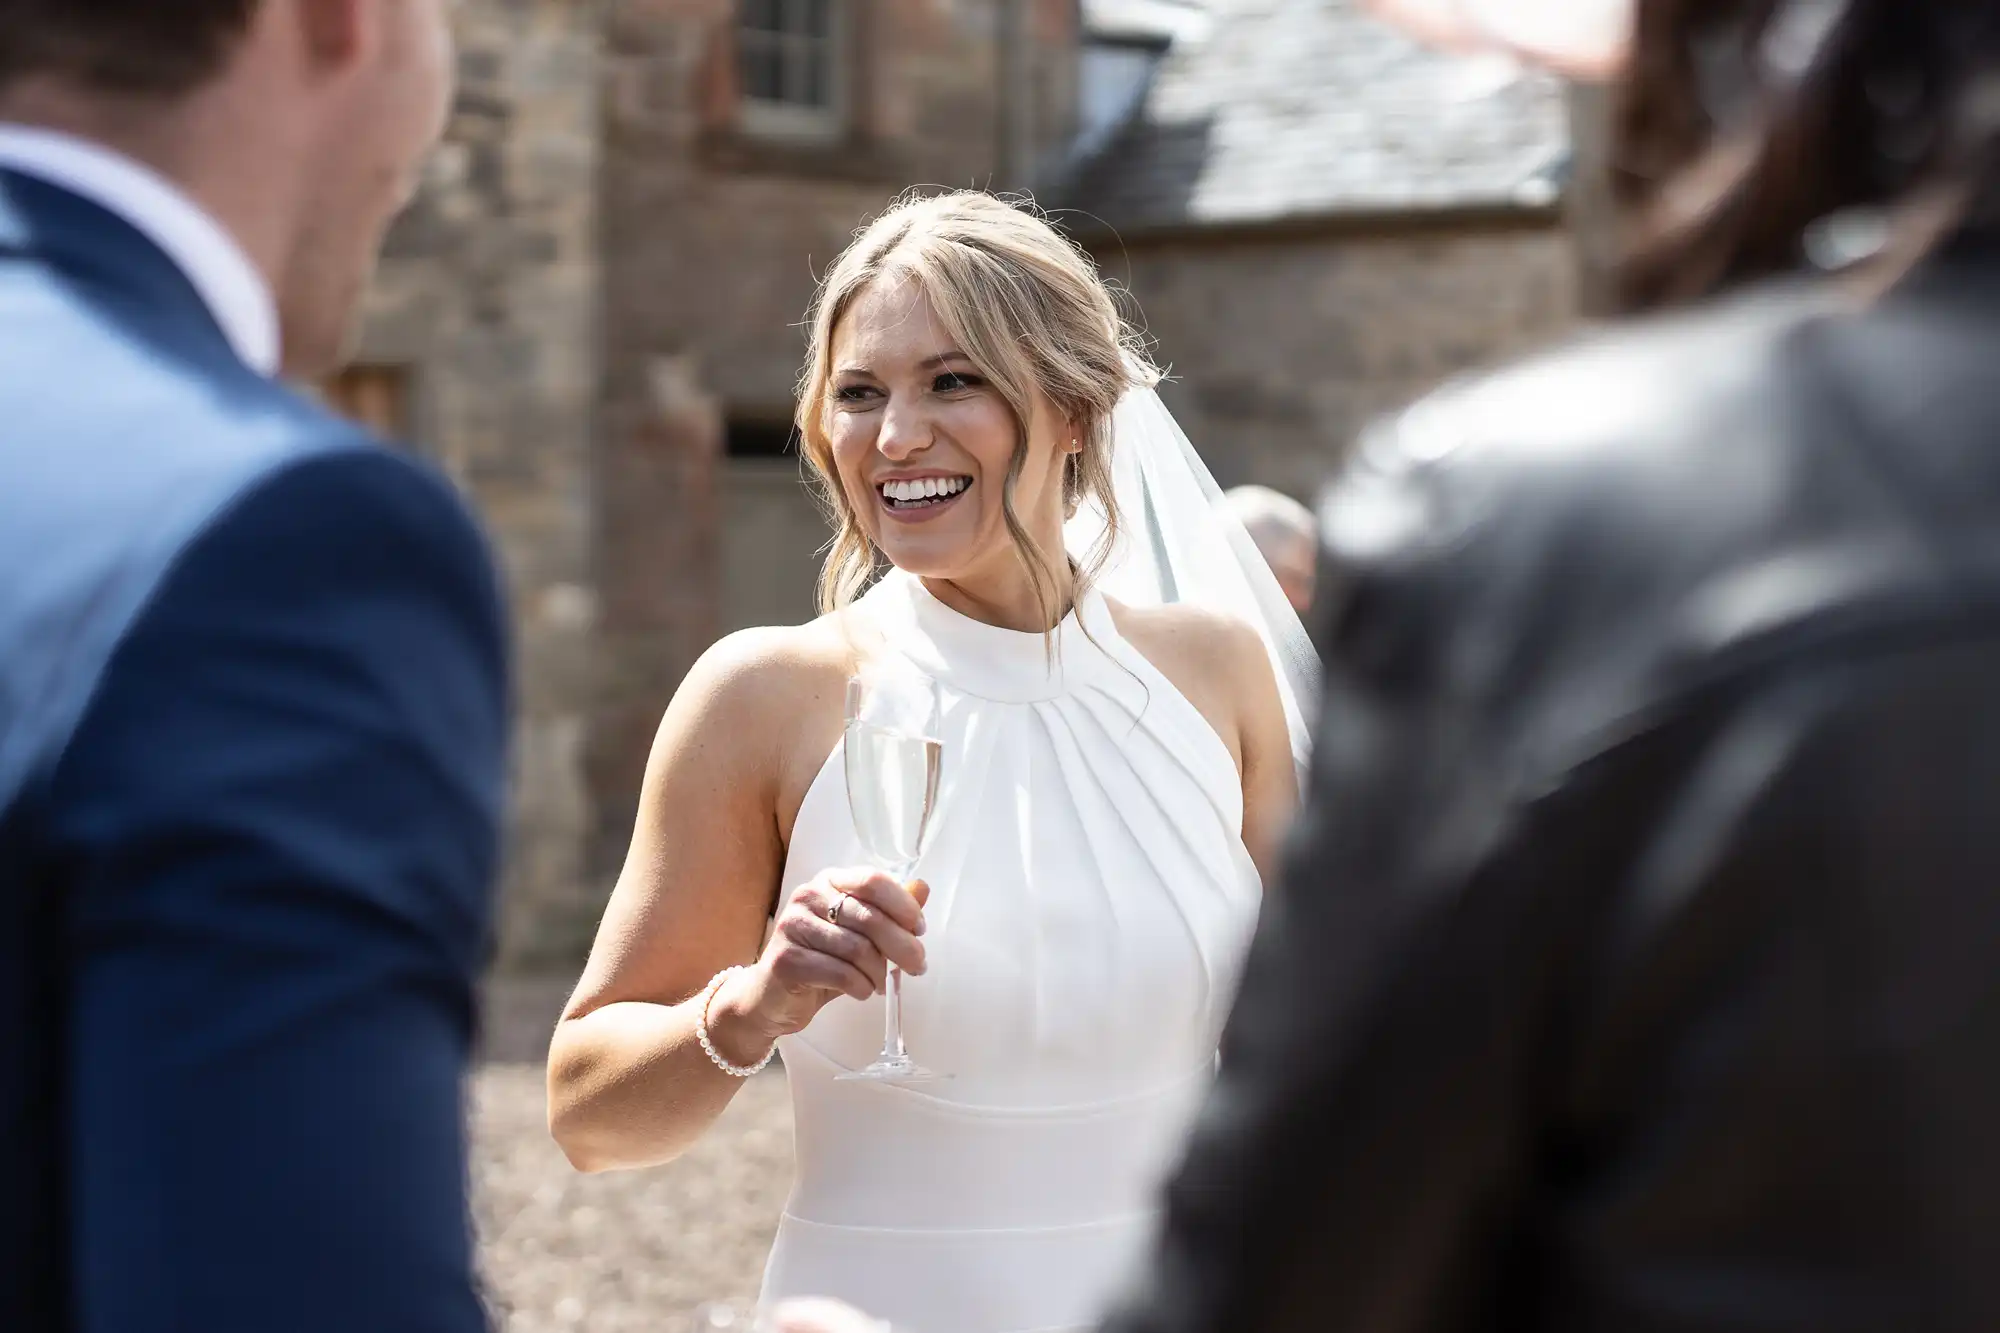 A joyful bride holding a champagne flute, laughing during a conversation with guests at an outdoor wedding setting.